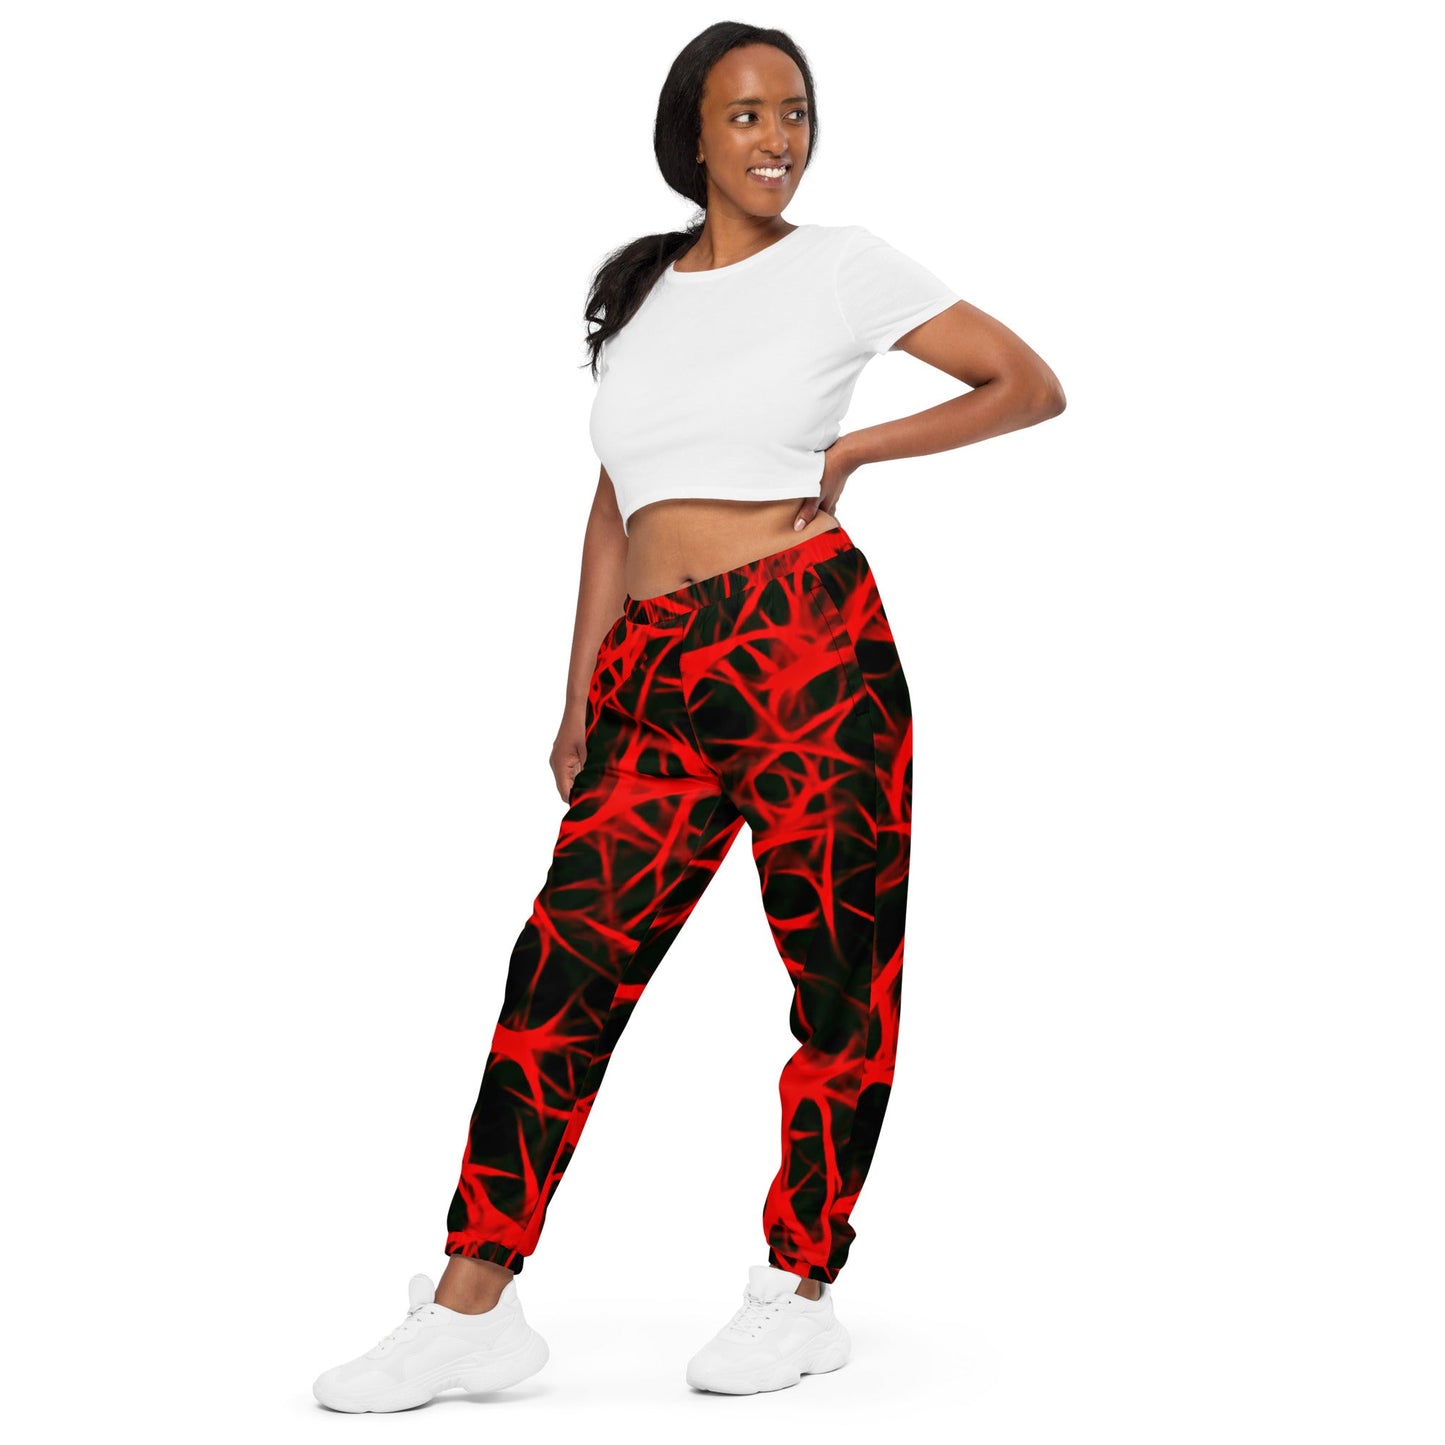 Into The Red Charged Unisex Track Pants "The Only Pants With A Lizard Vigilante Theme Song" - Lizard Vigilante